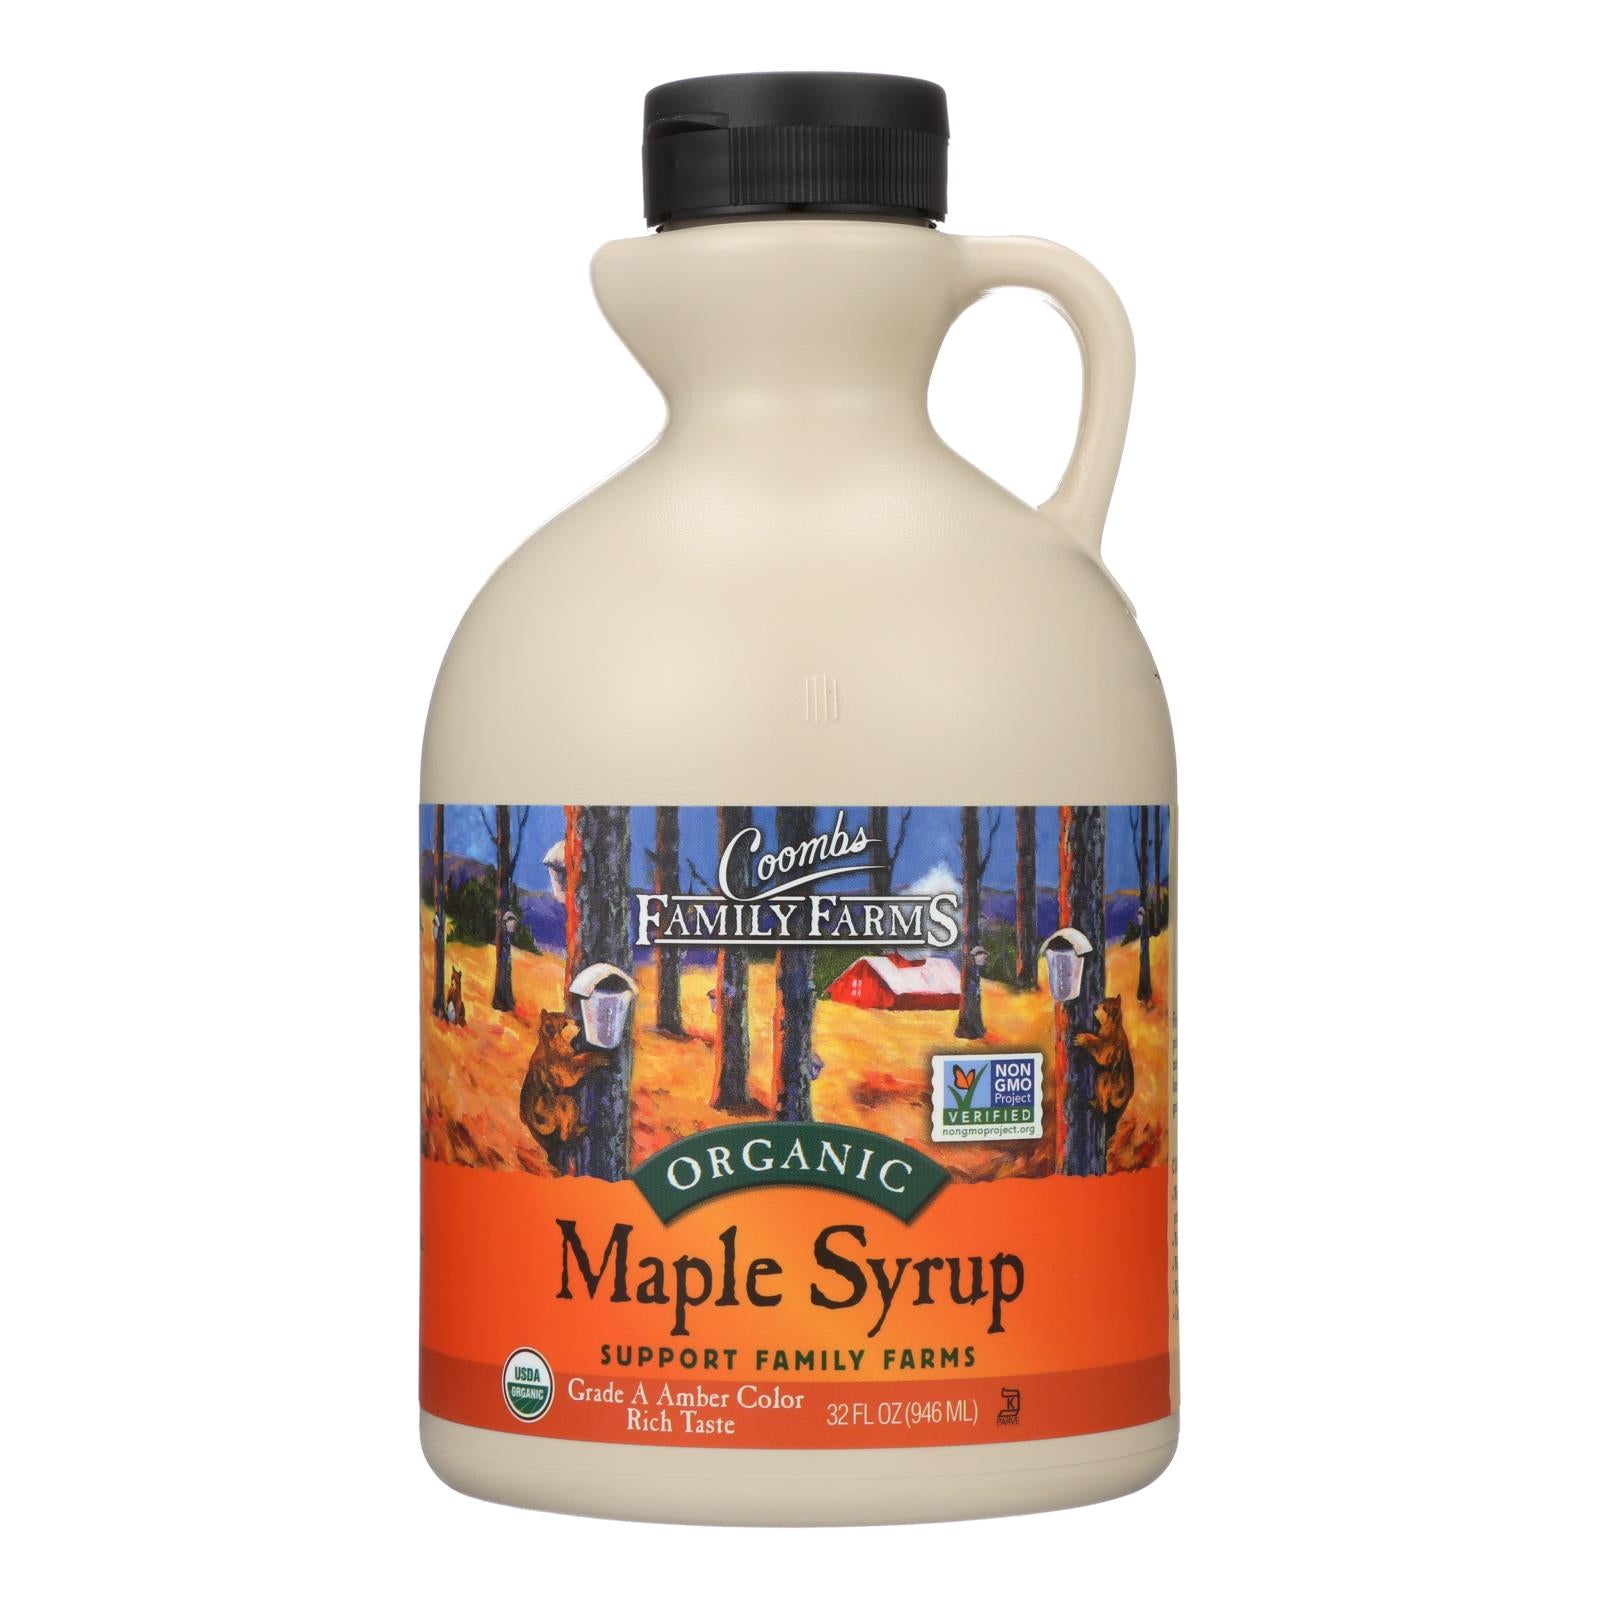 Coombs Family Farms Organic Maple Syrup - Case Of 6